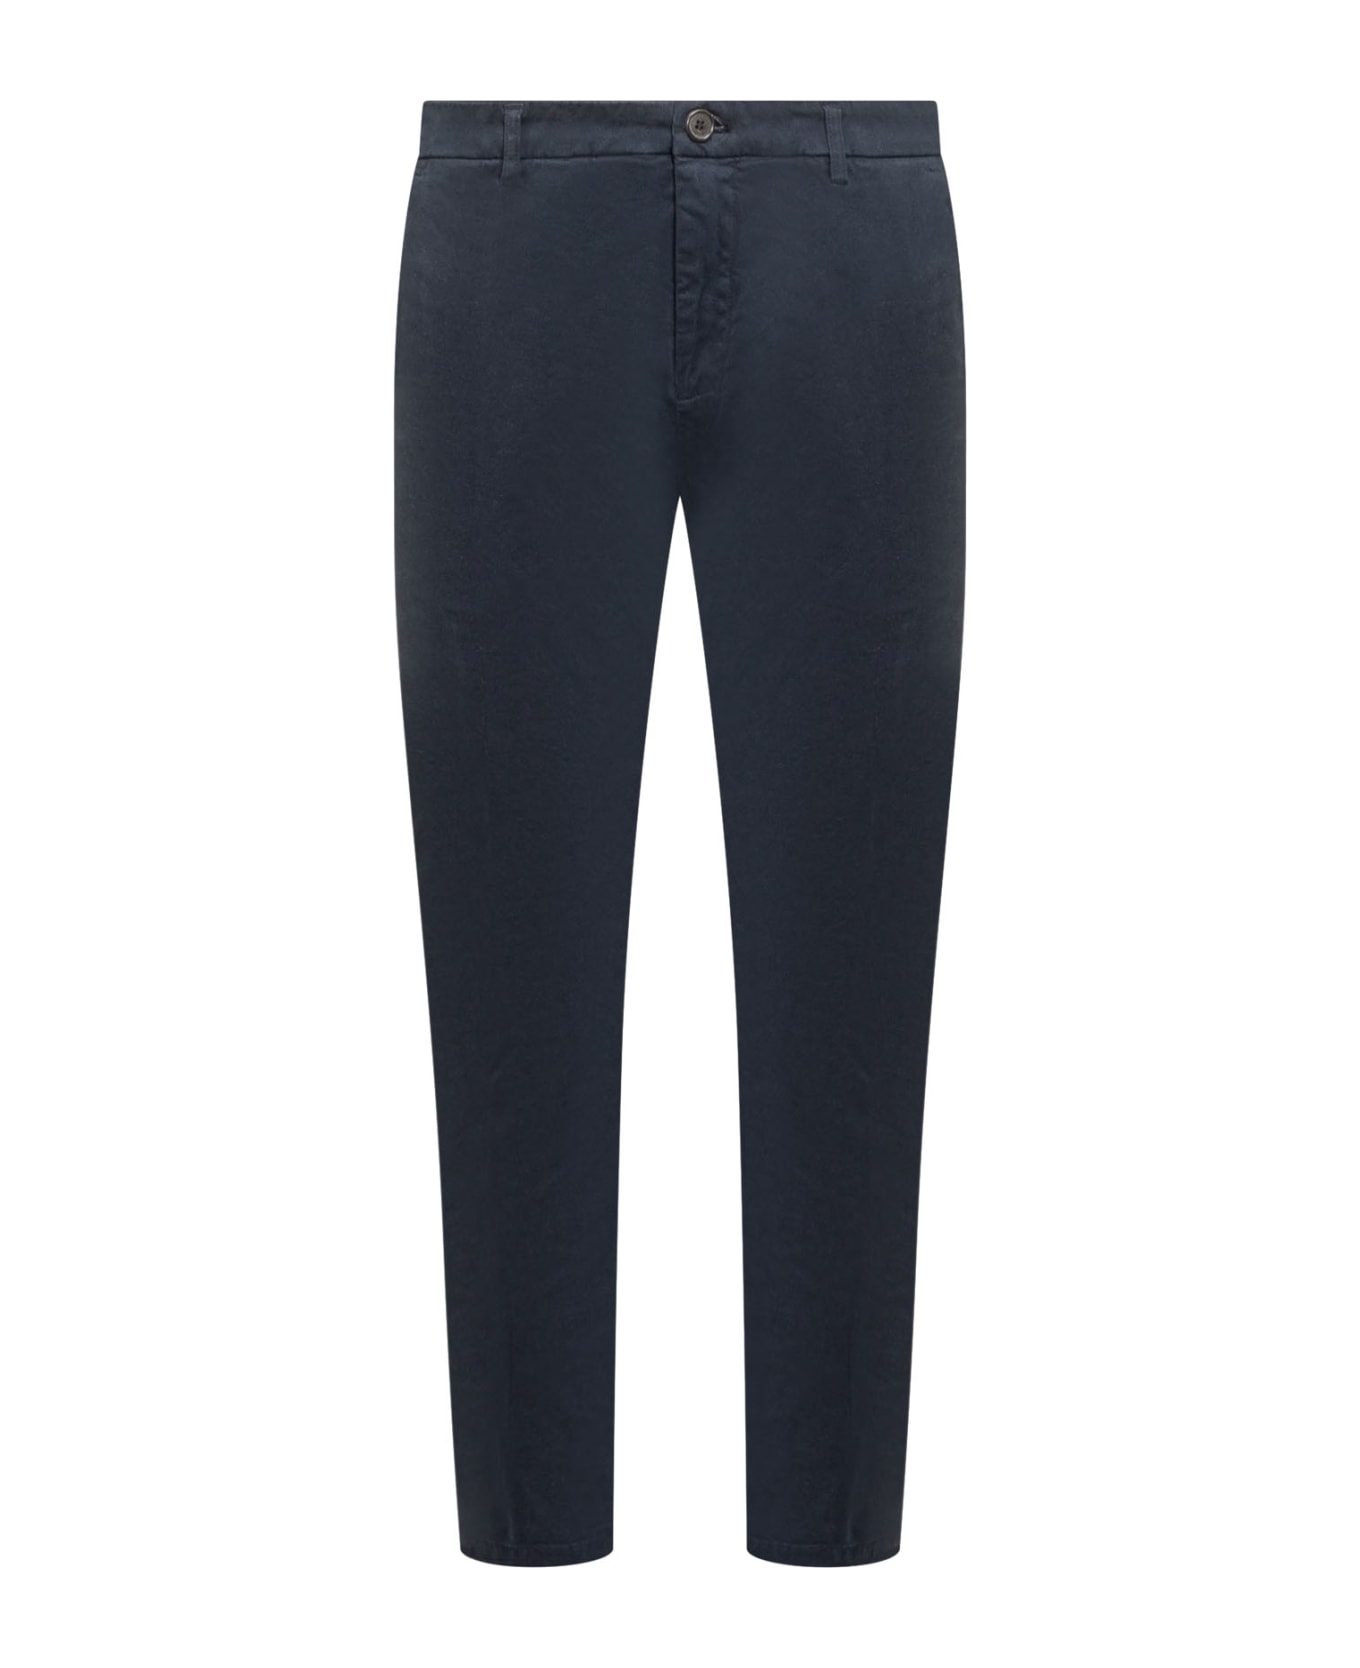 Department Five Prince Trousers Chinos - NAVY